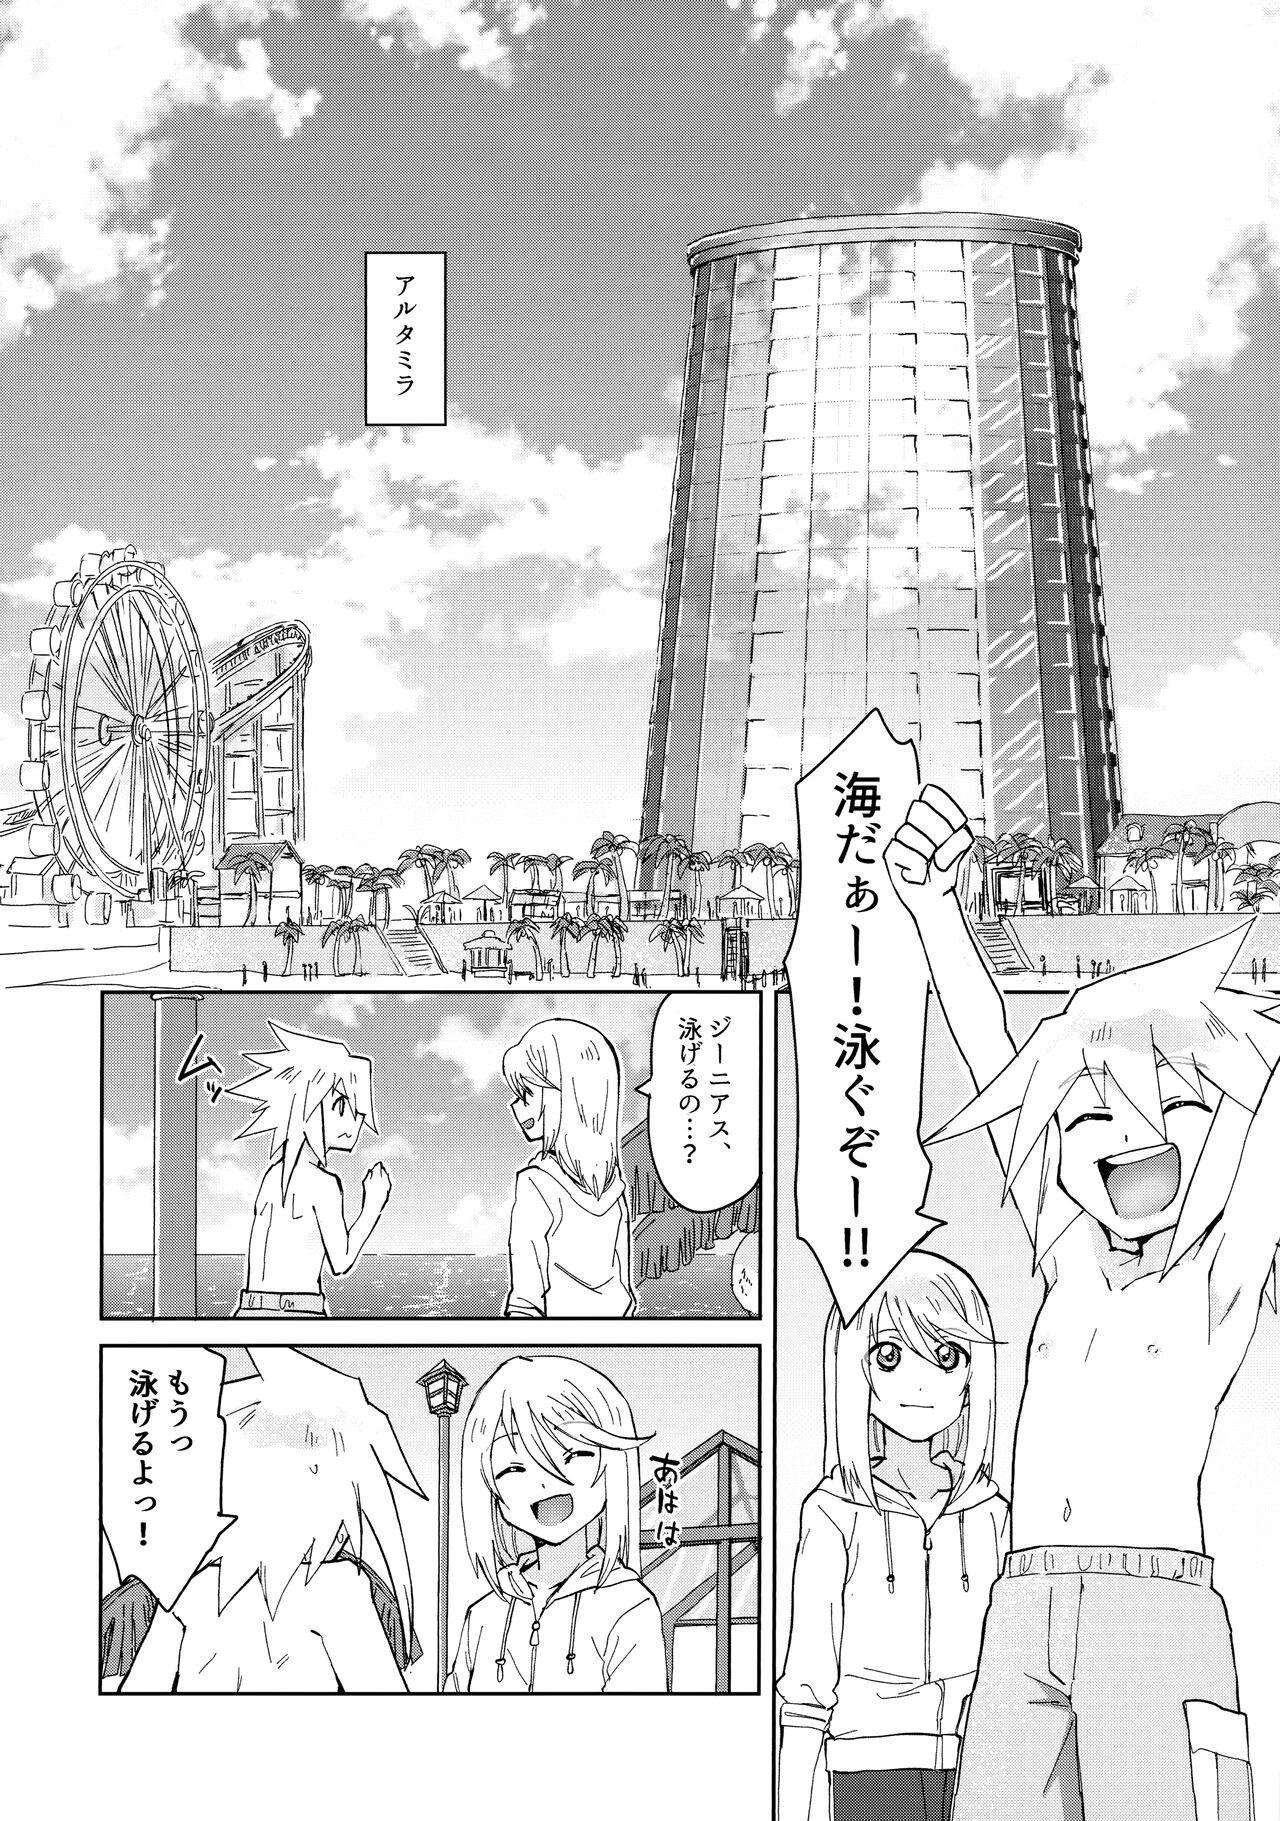 Piroca Tropical in Altamira - Tales of symphonia Amature Sex - Page 3